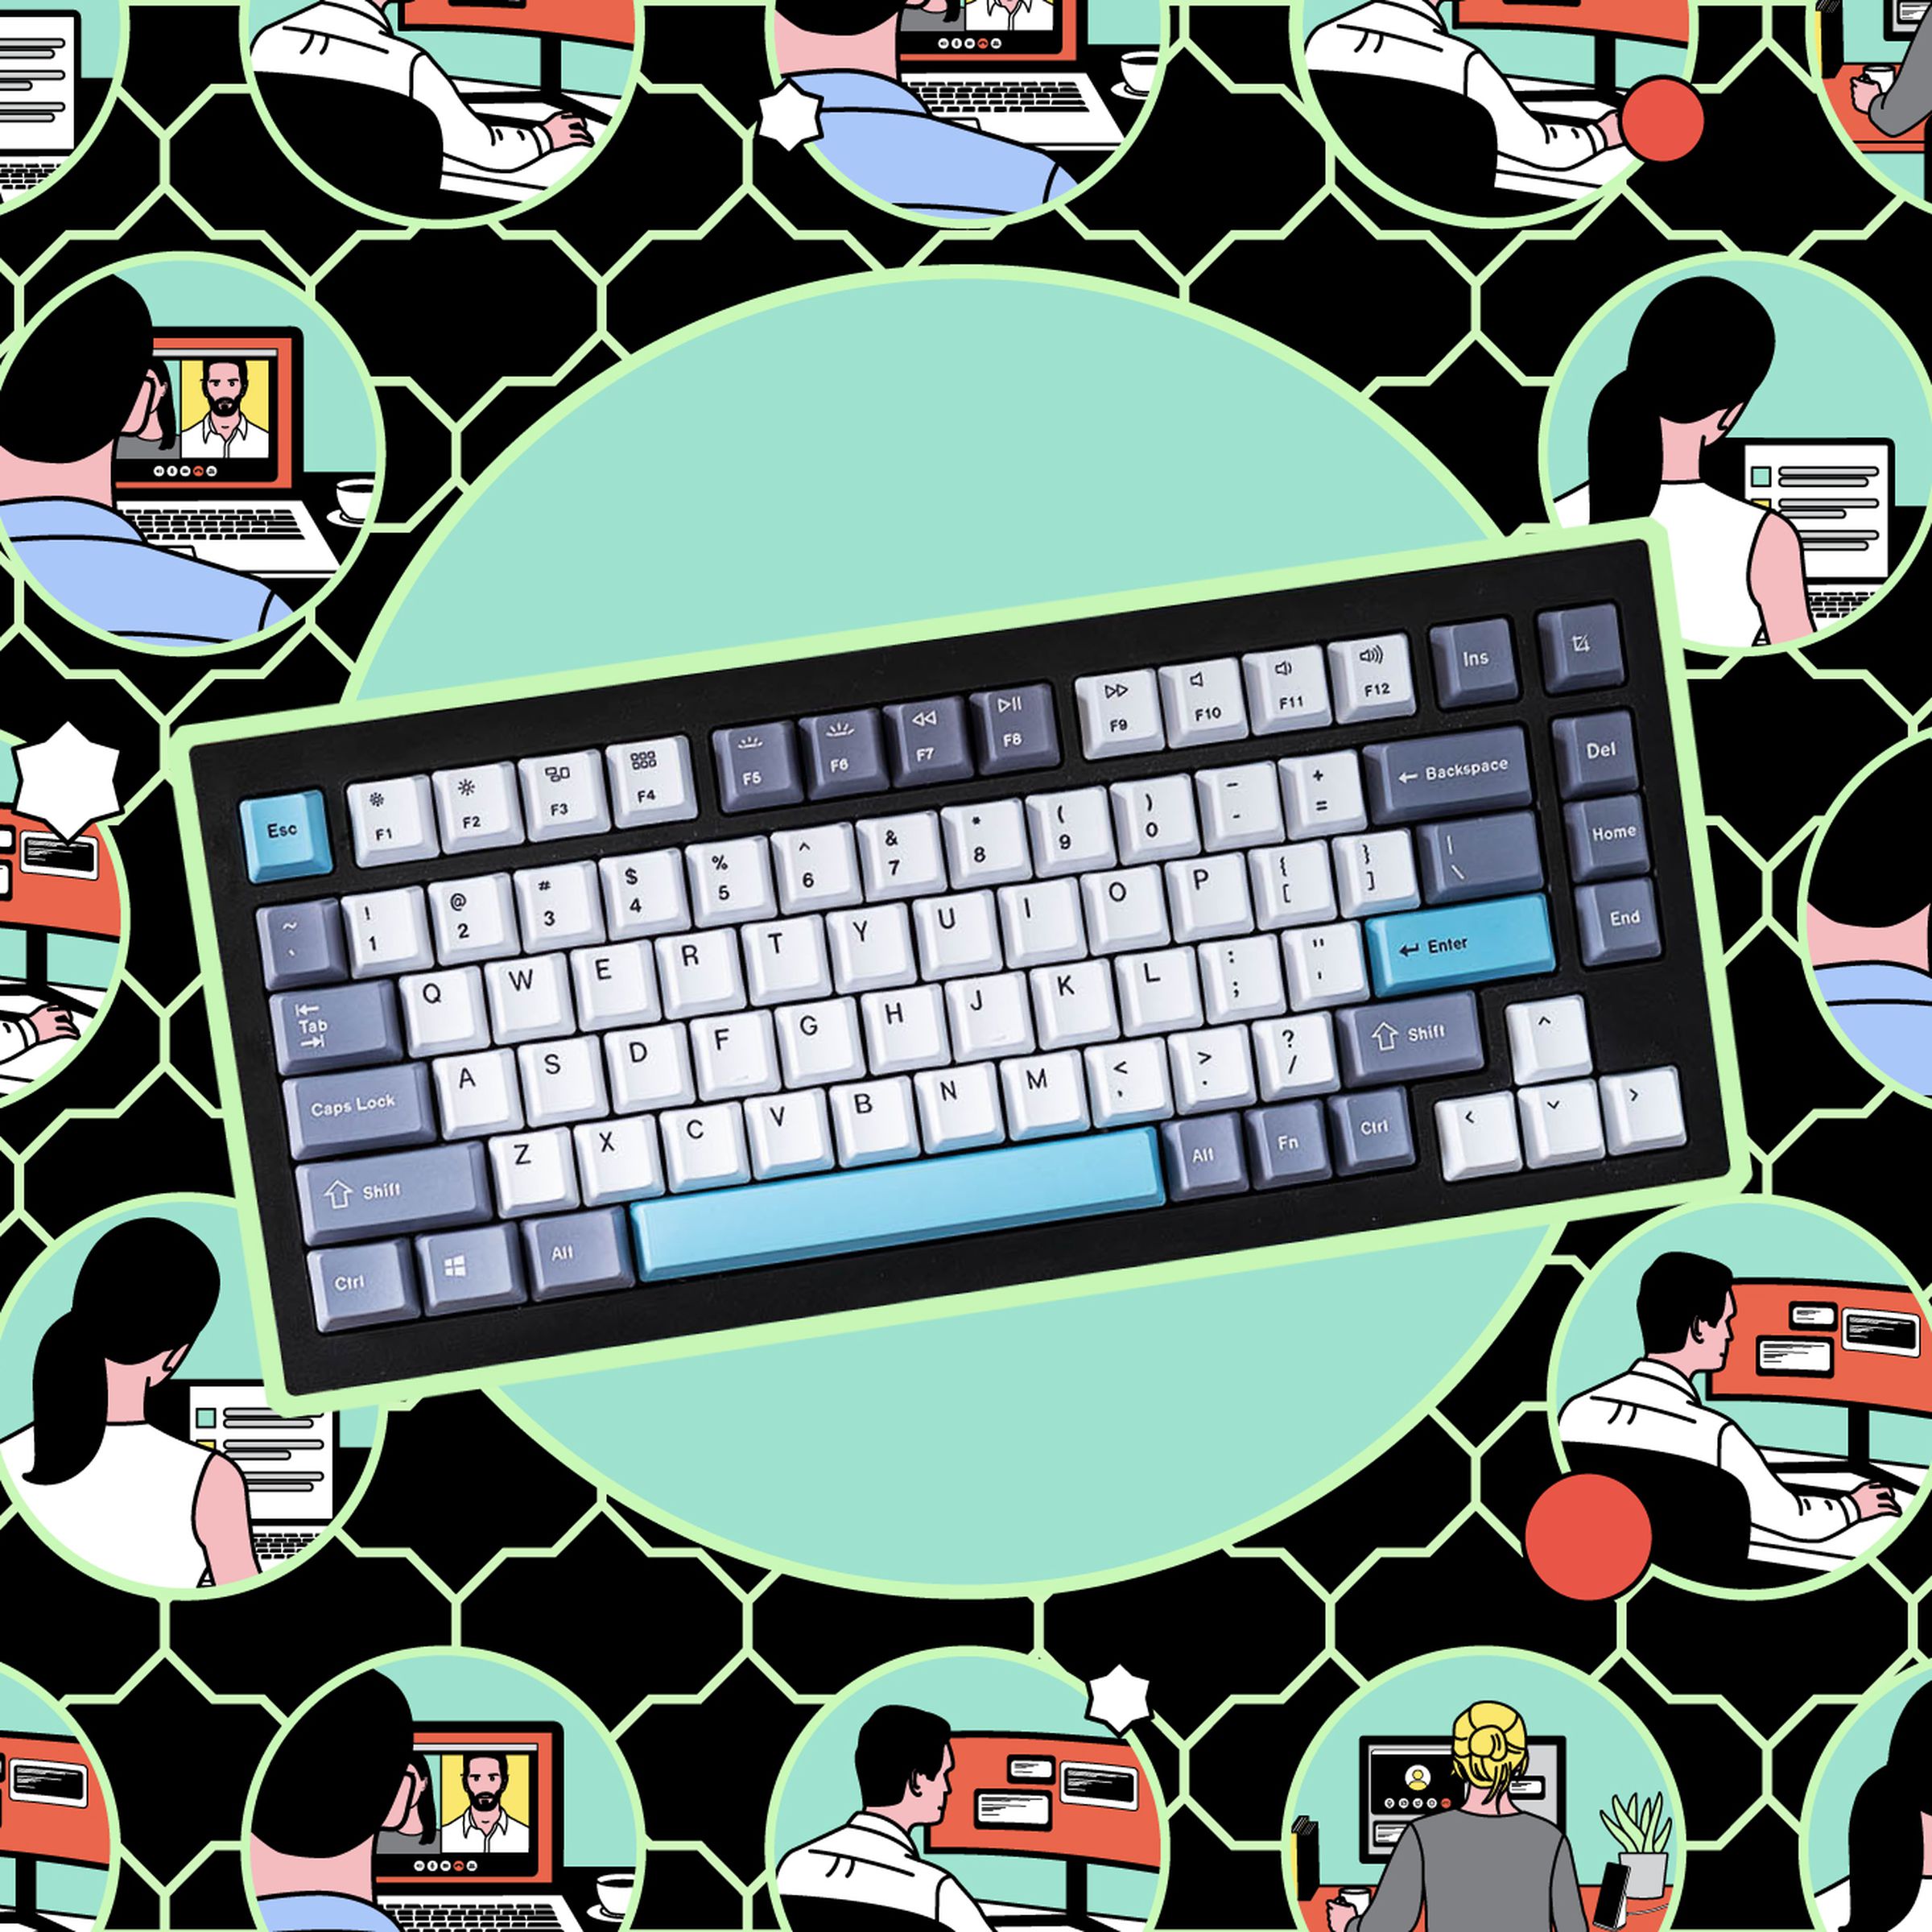 Illustration featuring a keyboard and various animated people typing on various computers